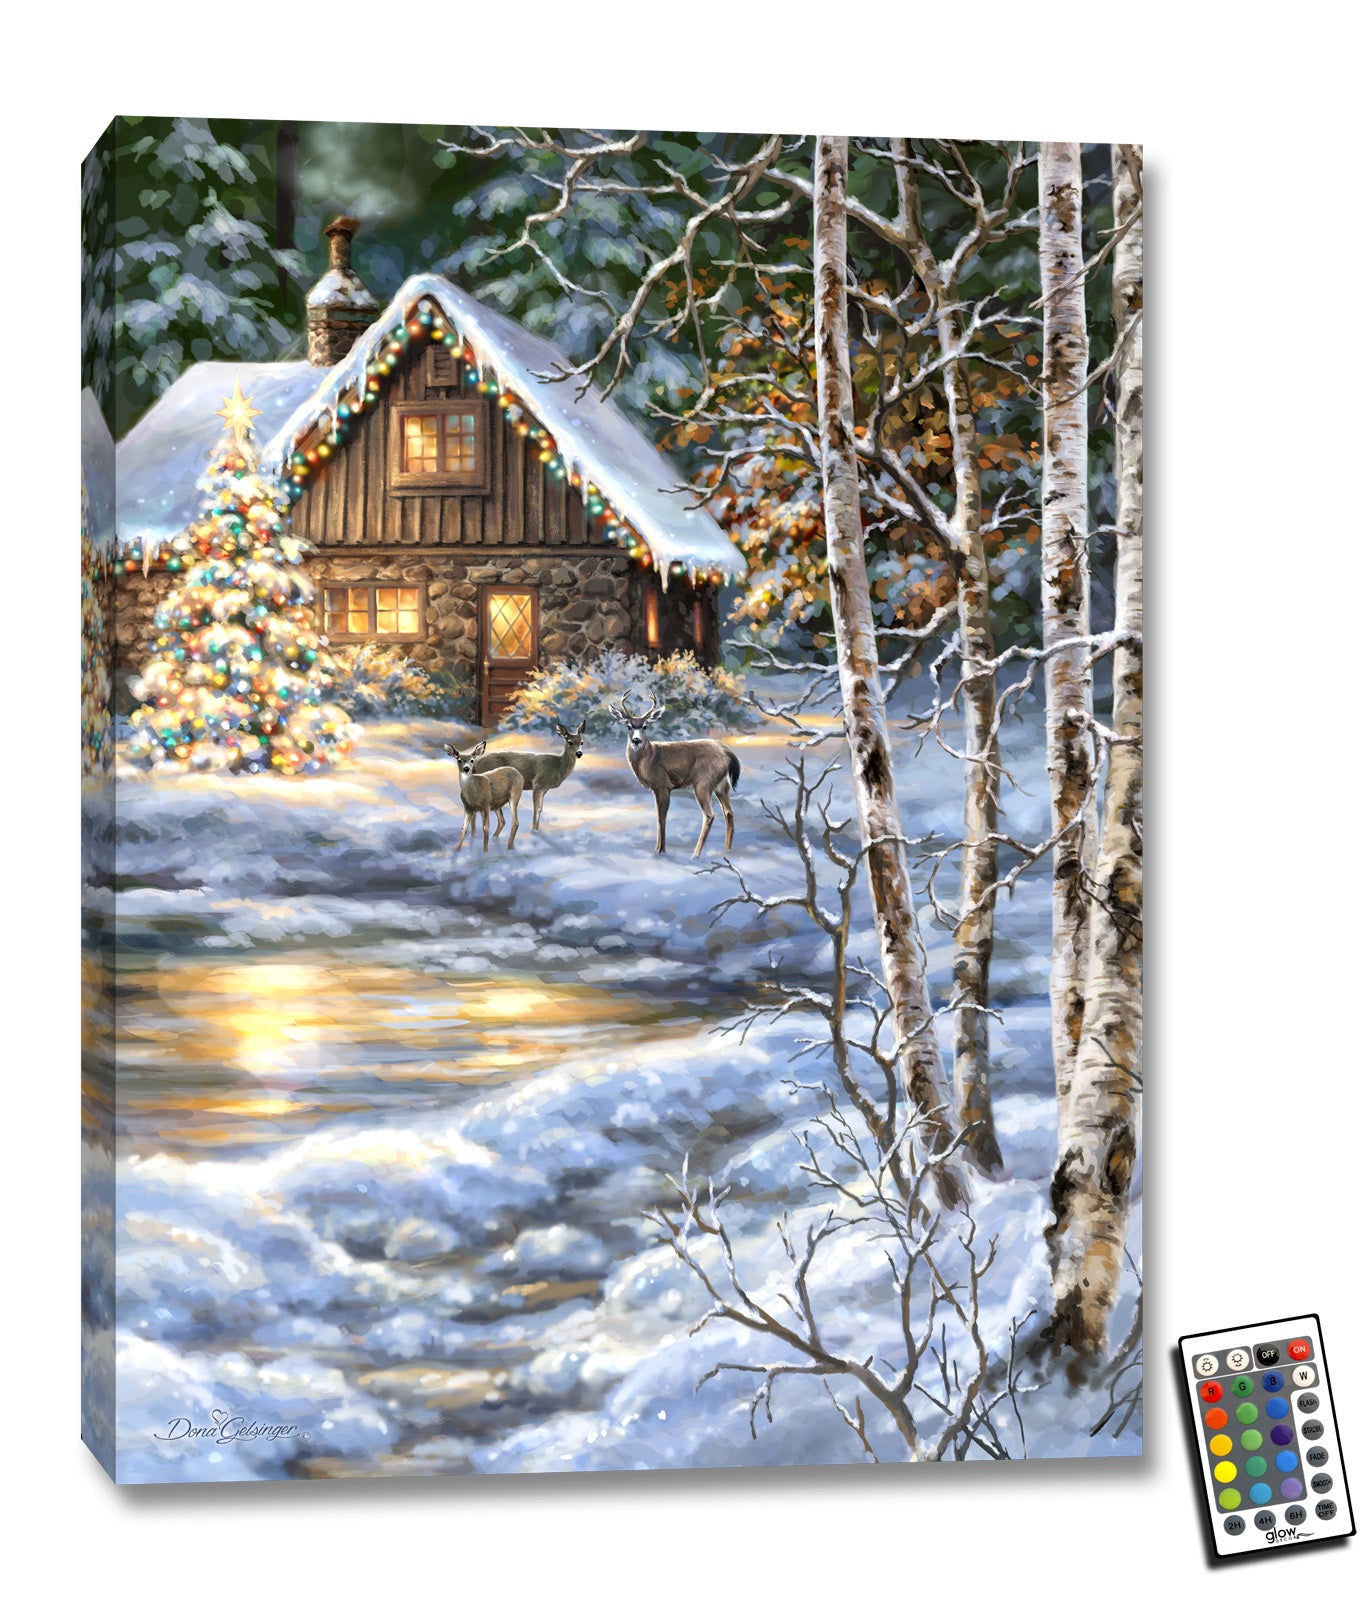 This stunning piece captures the magic of the season with a cozy cabin nestled amidst a snowy landscape, complete with a beautiful Christmas tree and two gentle deer nearby.